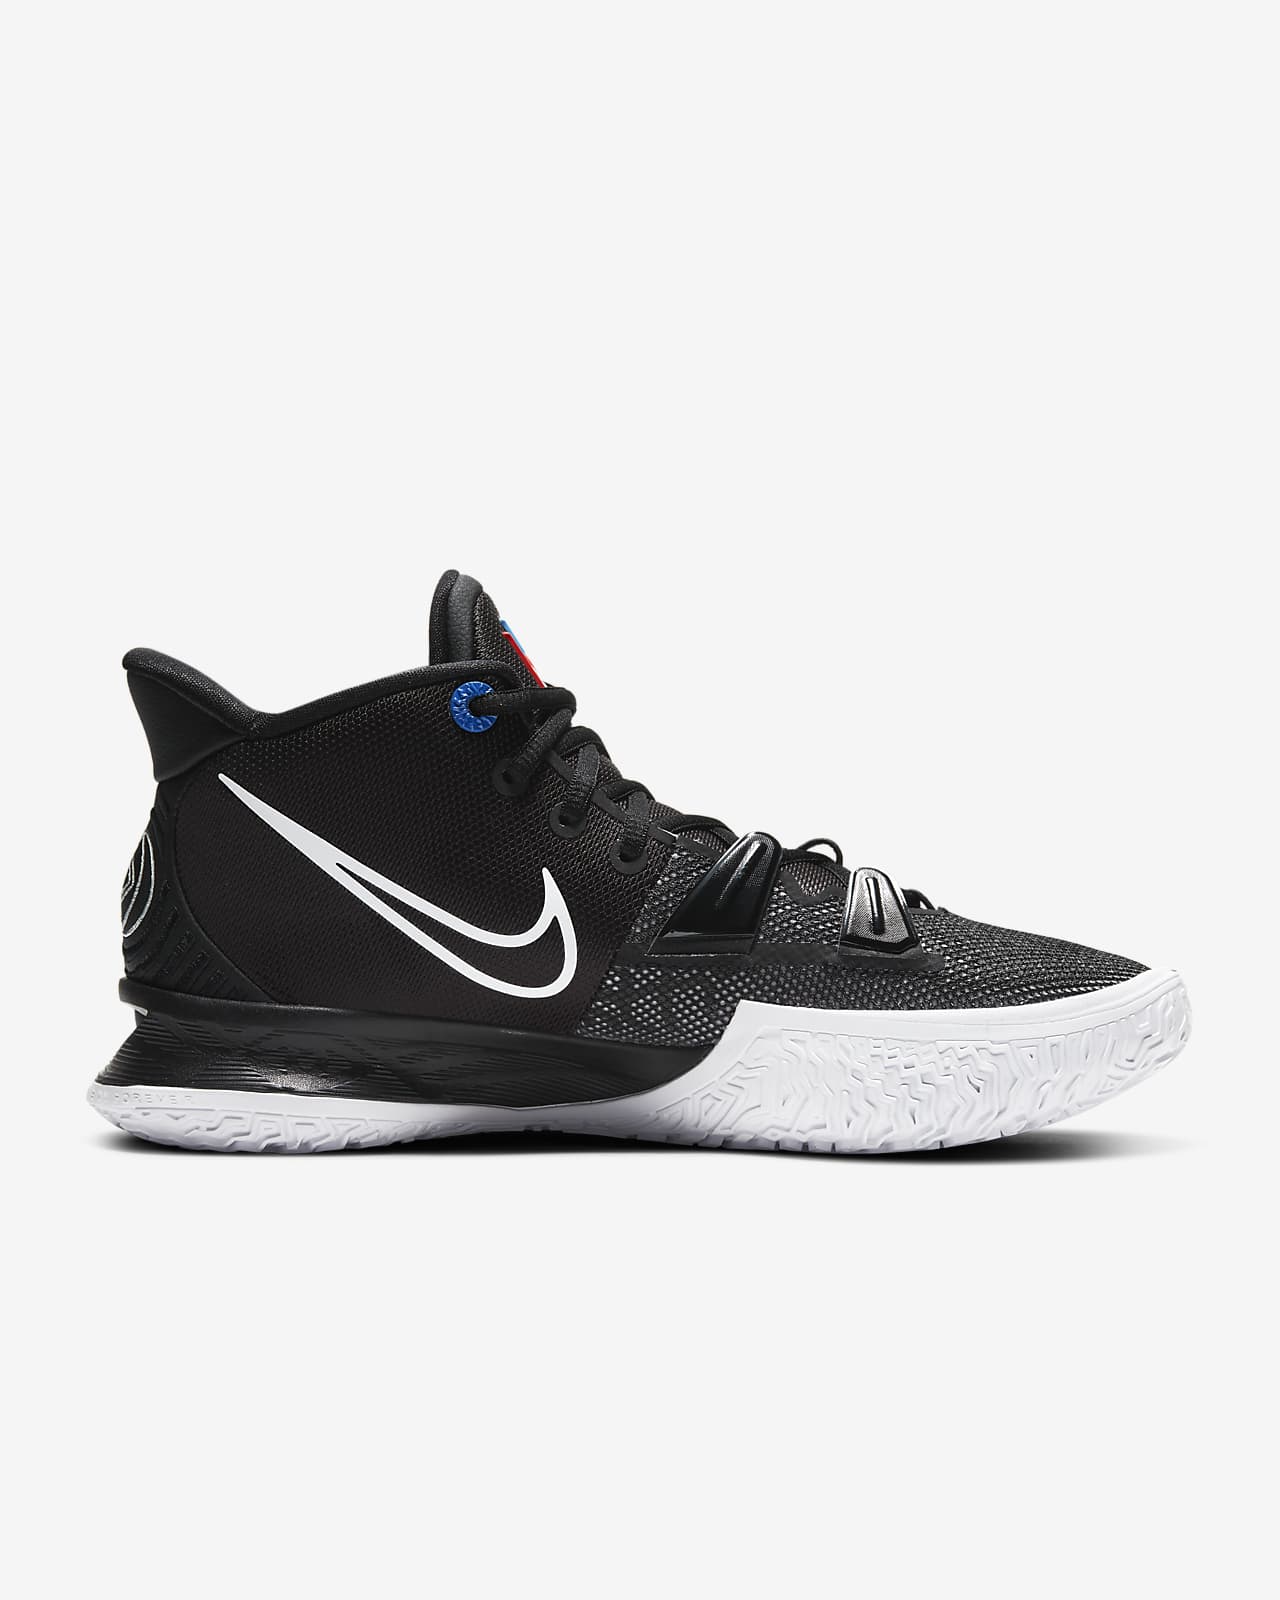 kyrie irving shoes 7